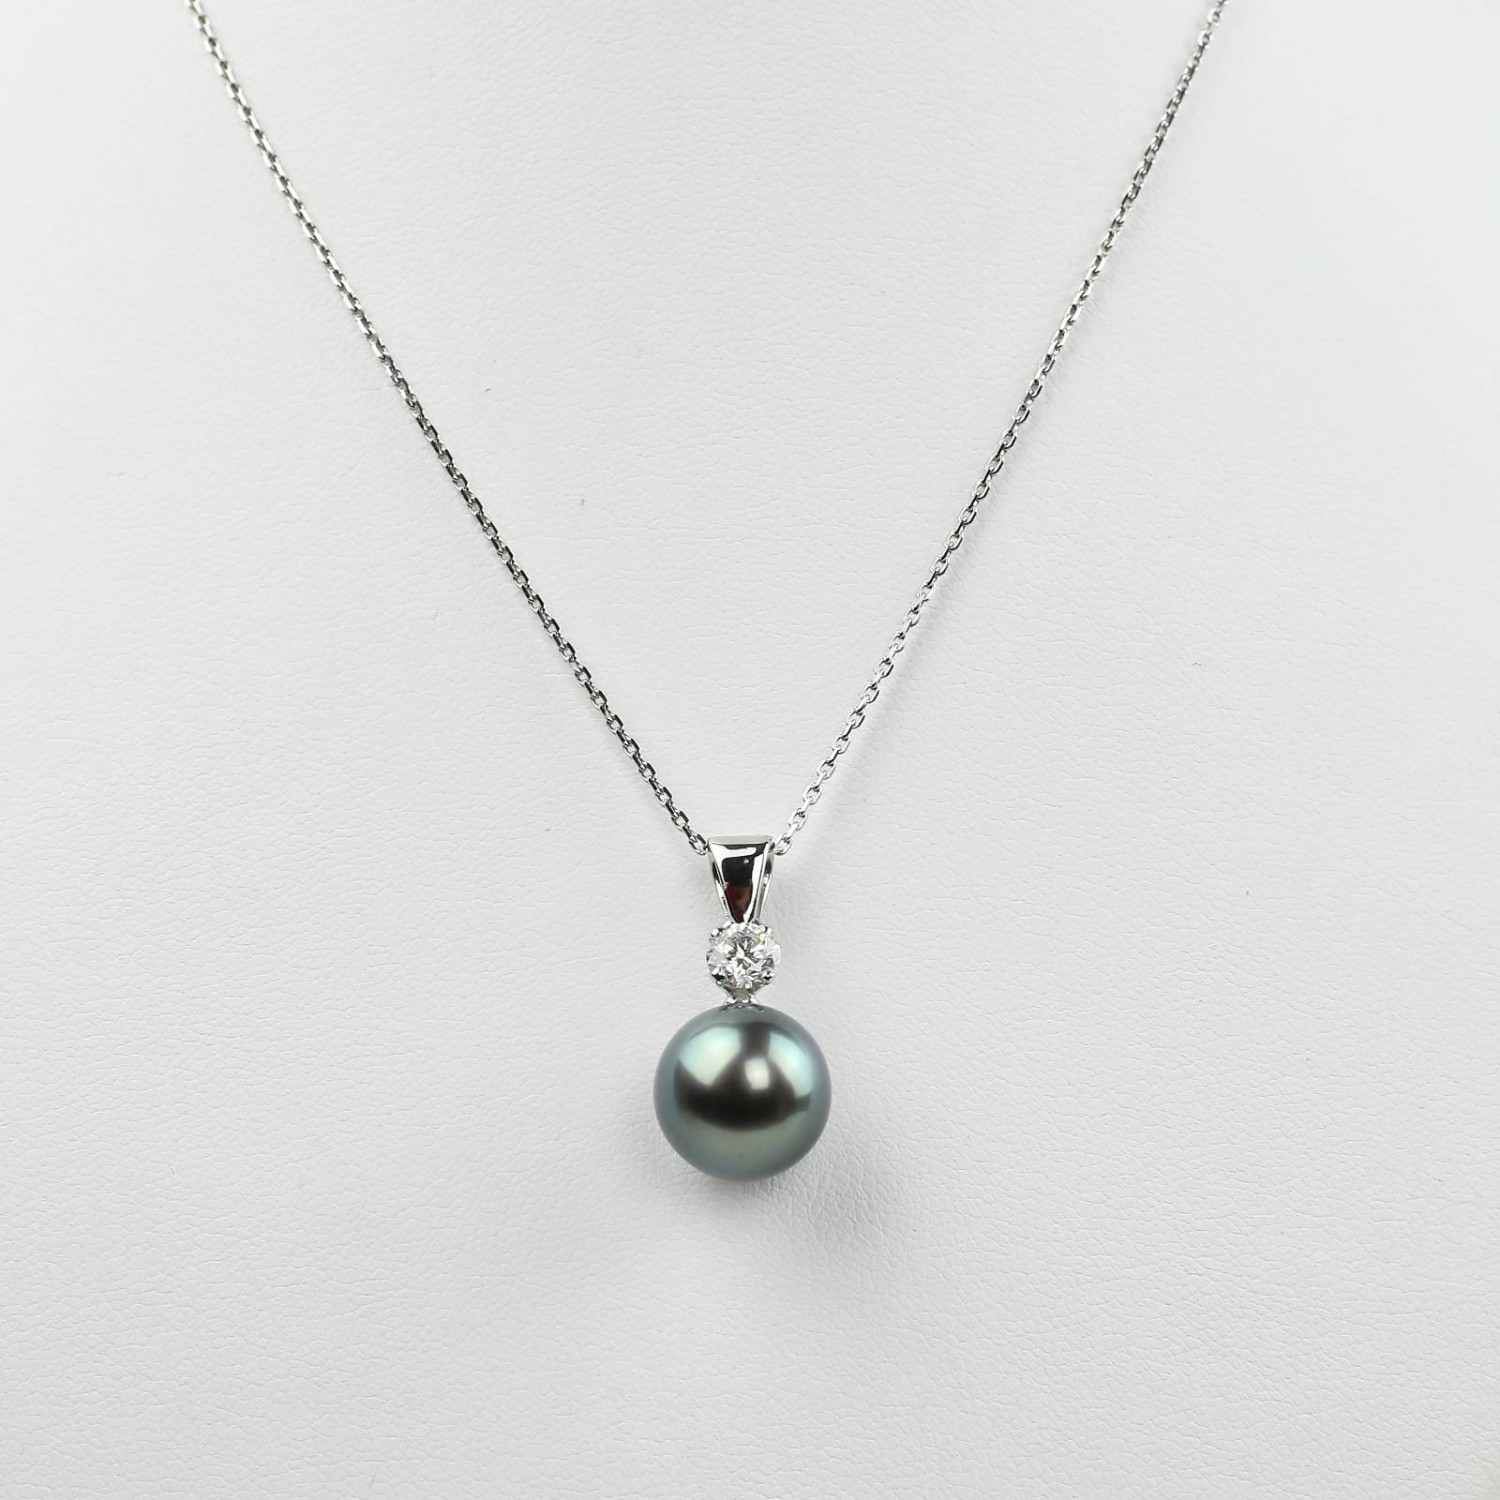 Pendant in 18k white gold with Tahitian pearls and diamonds.